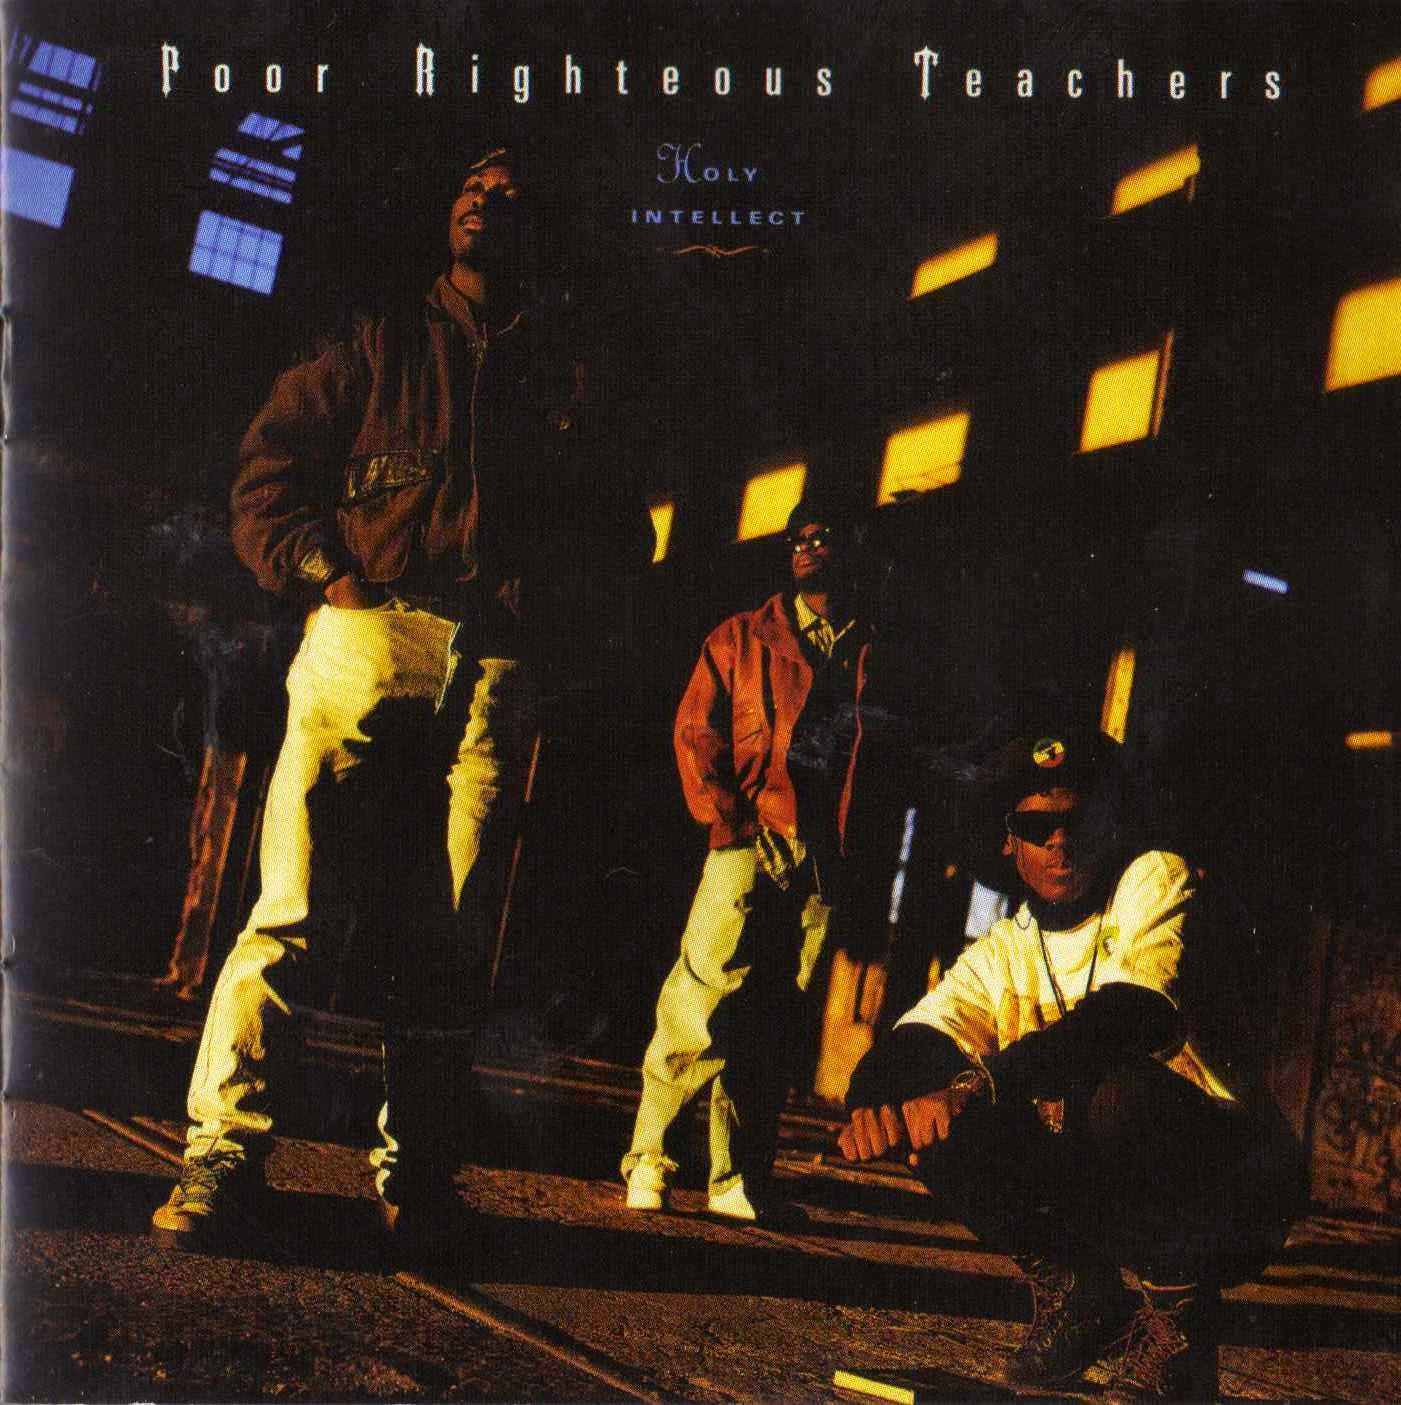 Poor Righteous Teachers – Holy Intellect (Expanded Edition) (1990 – 2014 RE) (CD) (FLAC + 320 kbps)